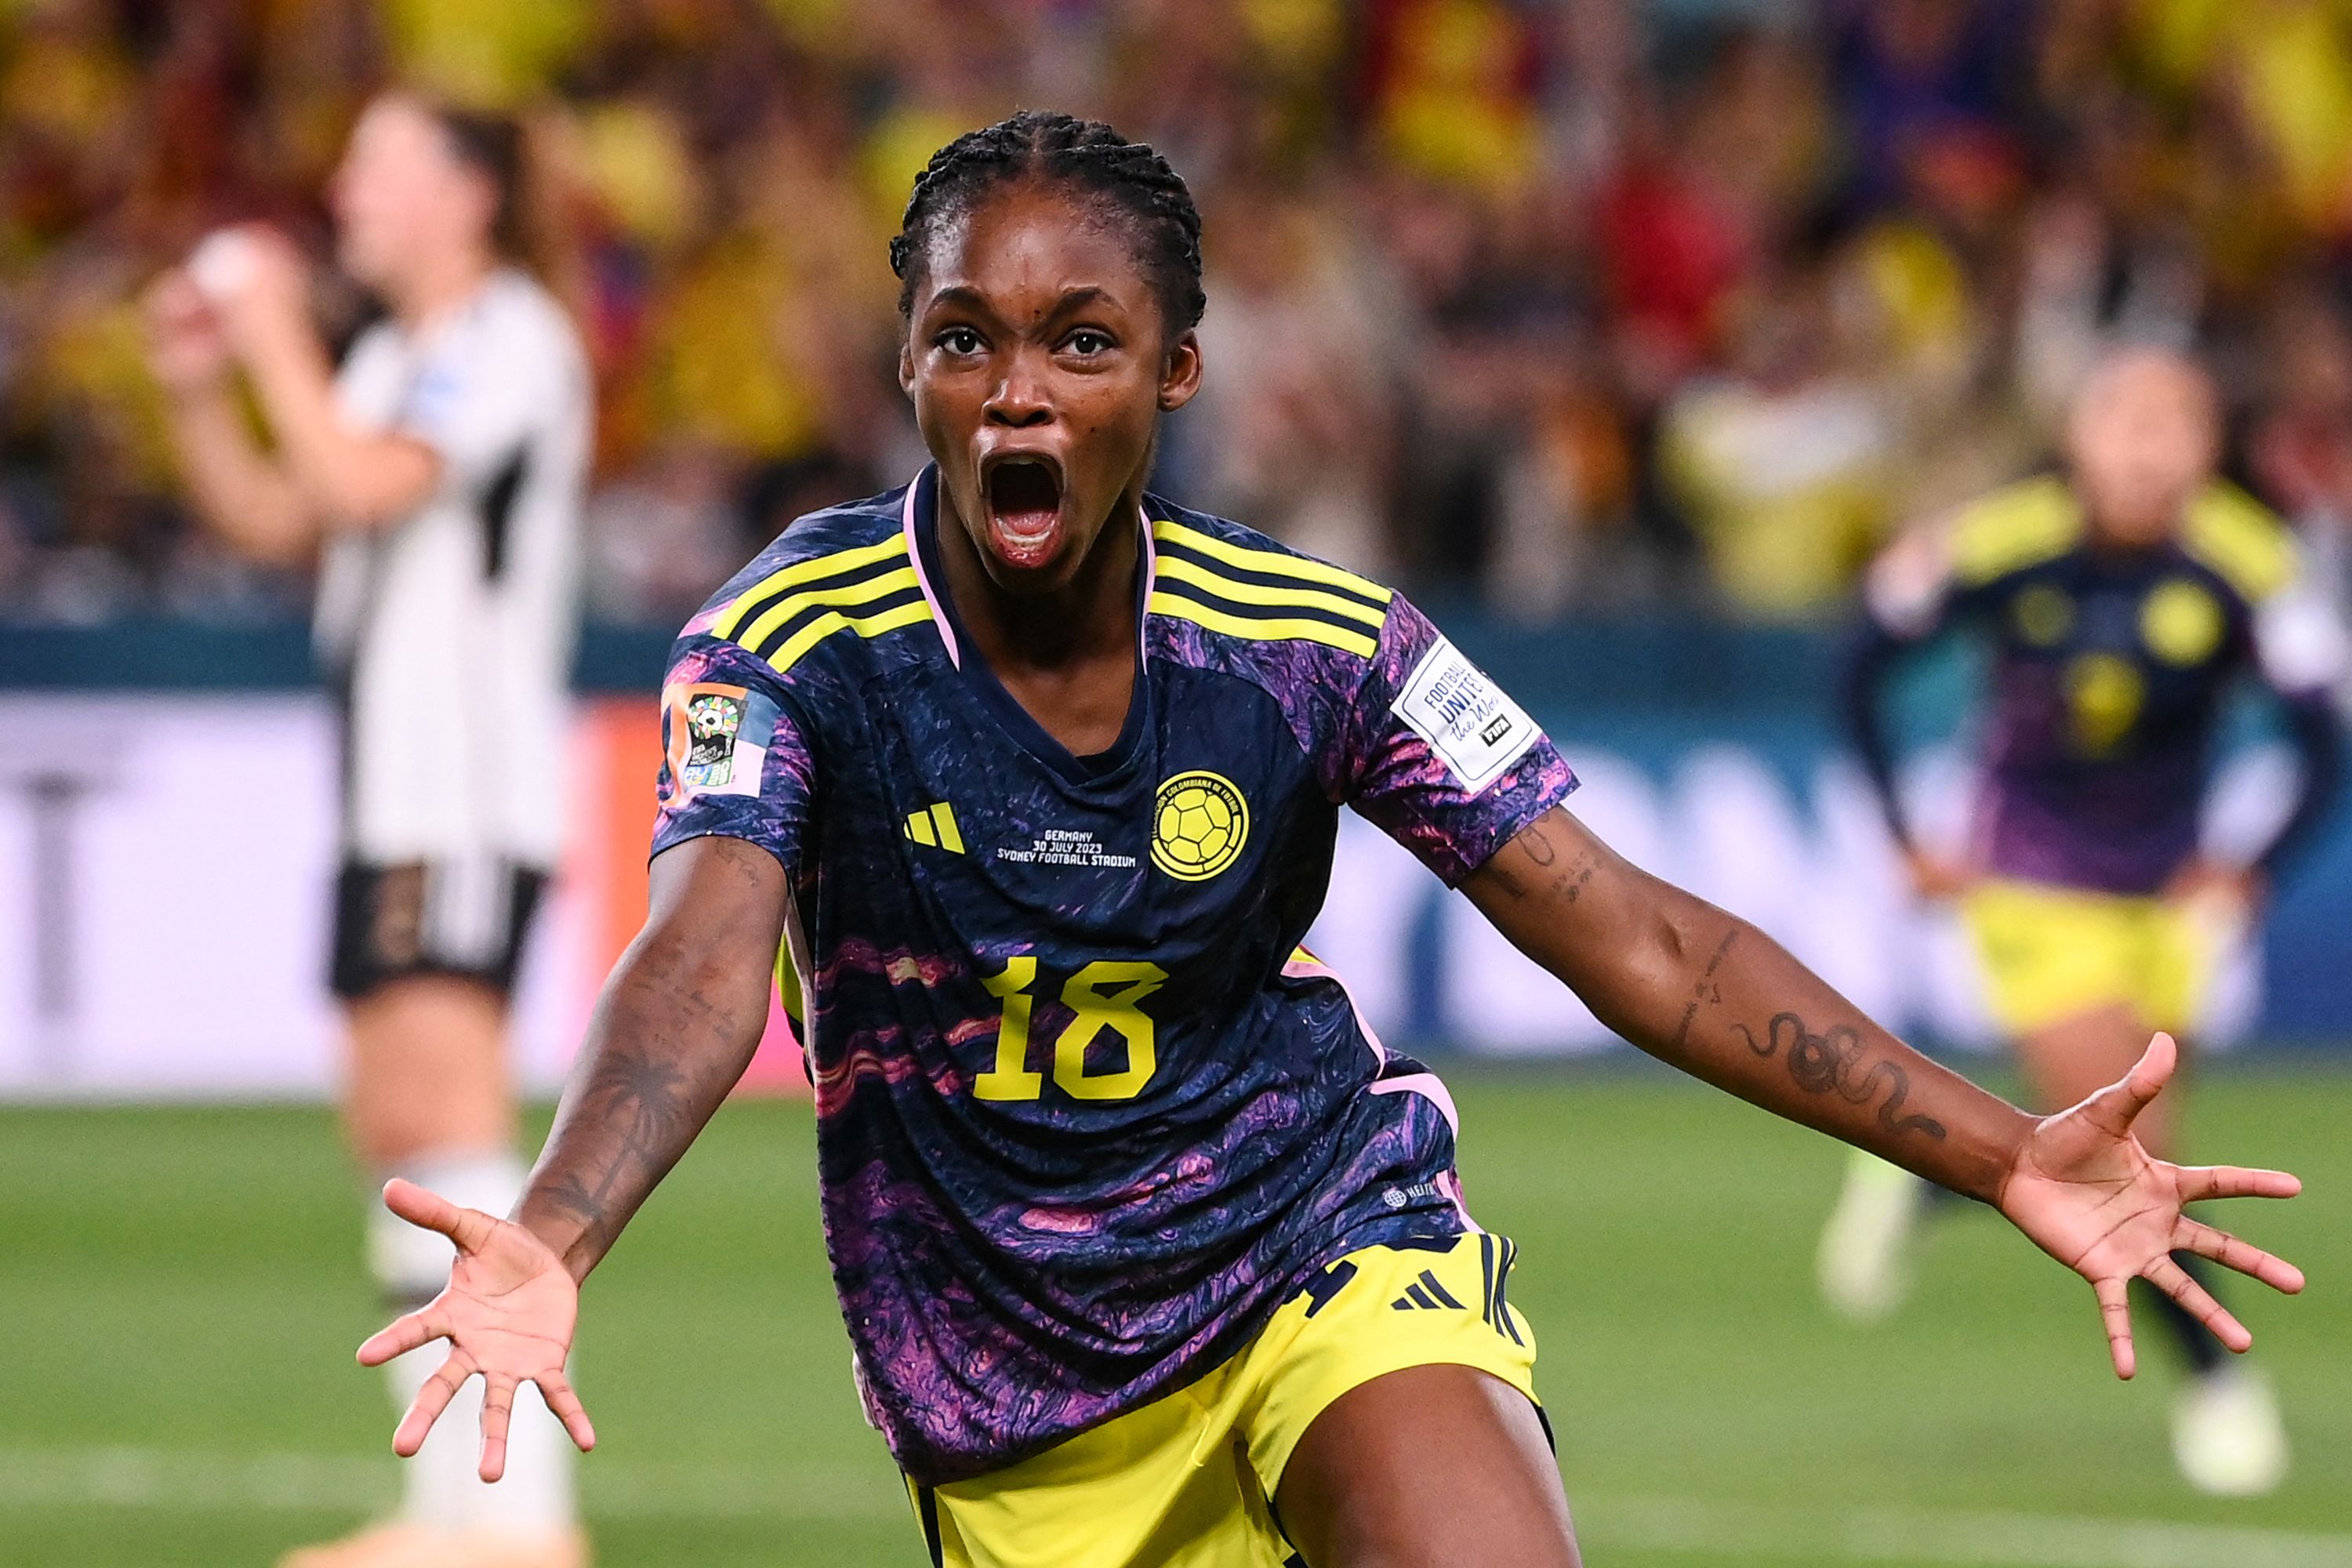 Linda Caicedo: Colombia star, 18, introduces herself as one of the